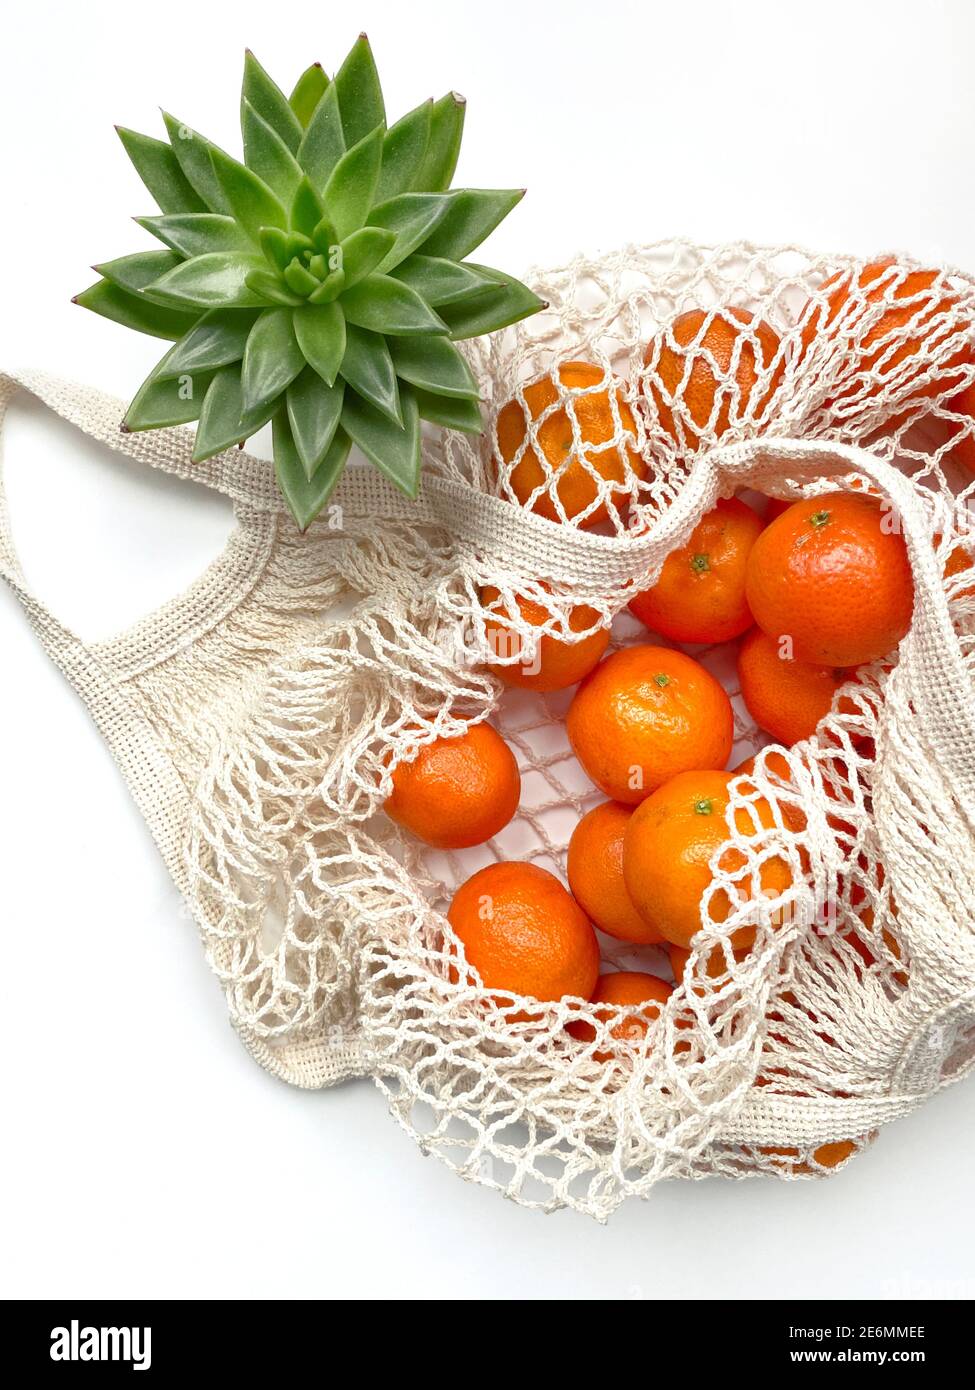 https://c8.alamy.com/comp/2E6MMEE/mesh-bag-of-fresh-oranges-healthy-citrus-fruits-from-on-white-background-flat-lay-top-view-2E6MMEE.jpg